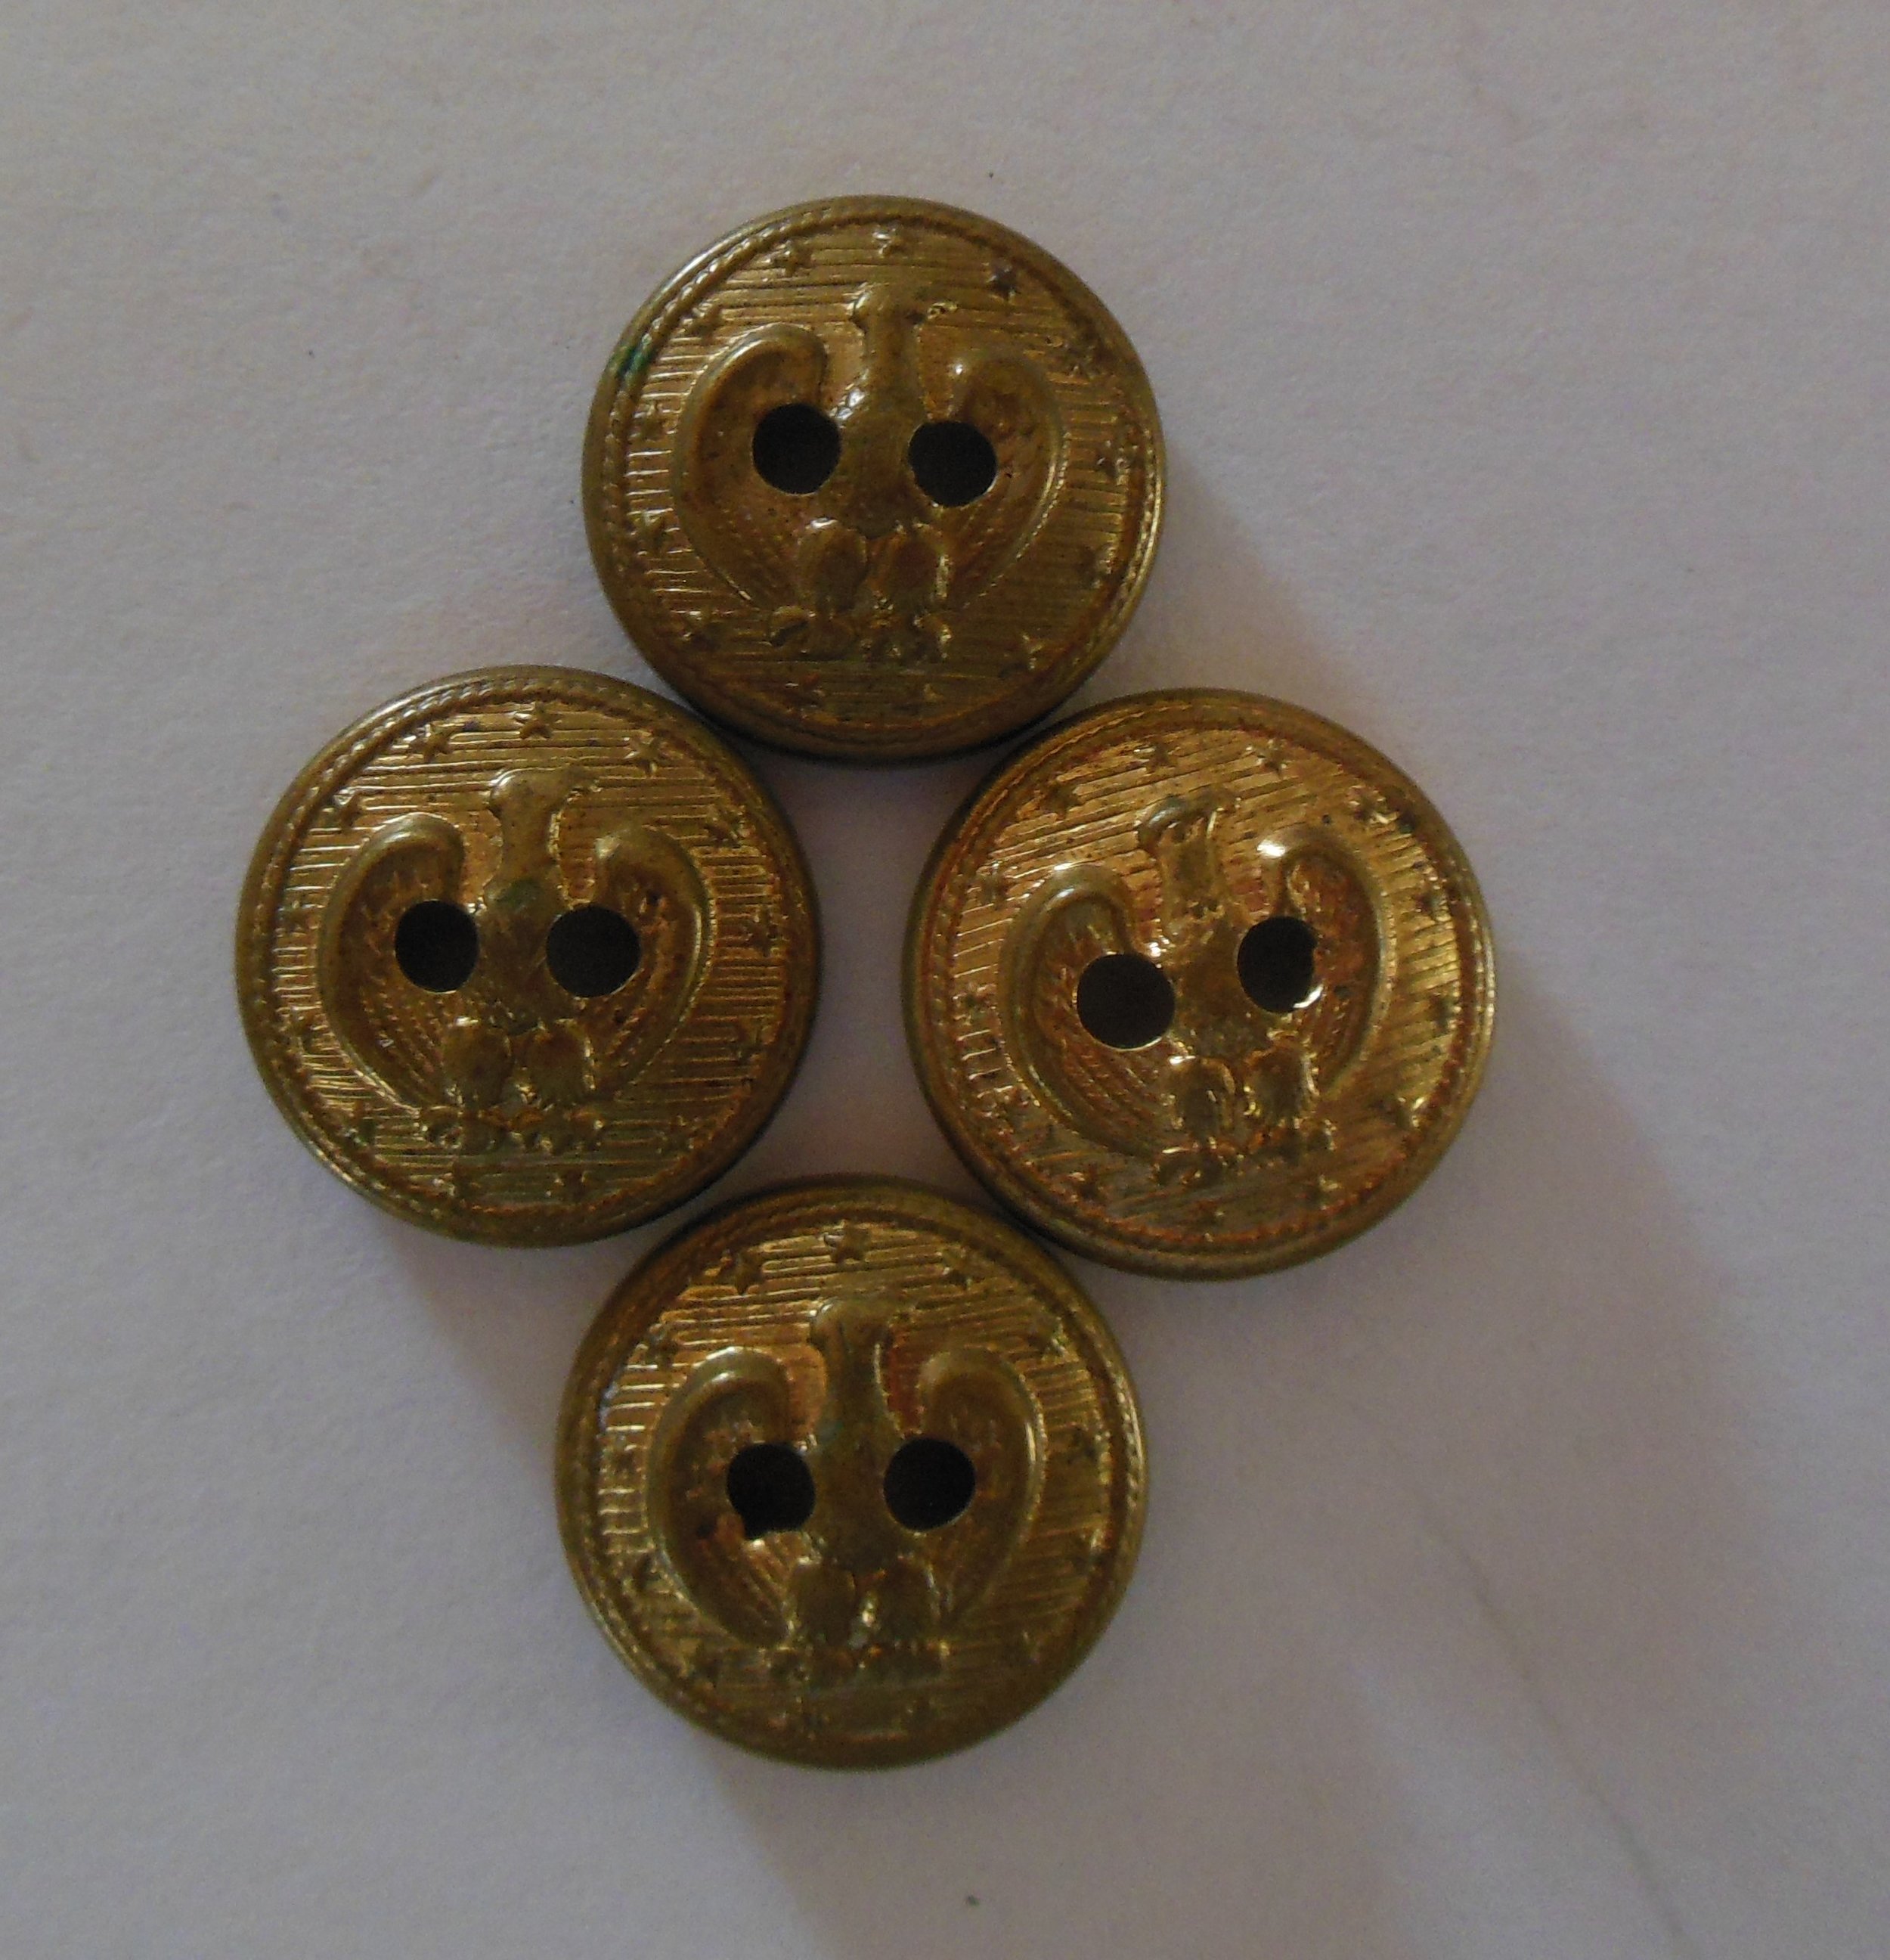 Details about   Vintage “Latest Style” Buttons 1941-2 Navy Insignia Green Card of 4 Buttons L/10 